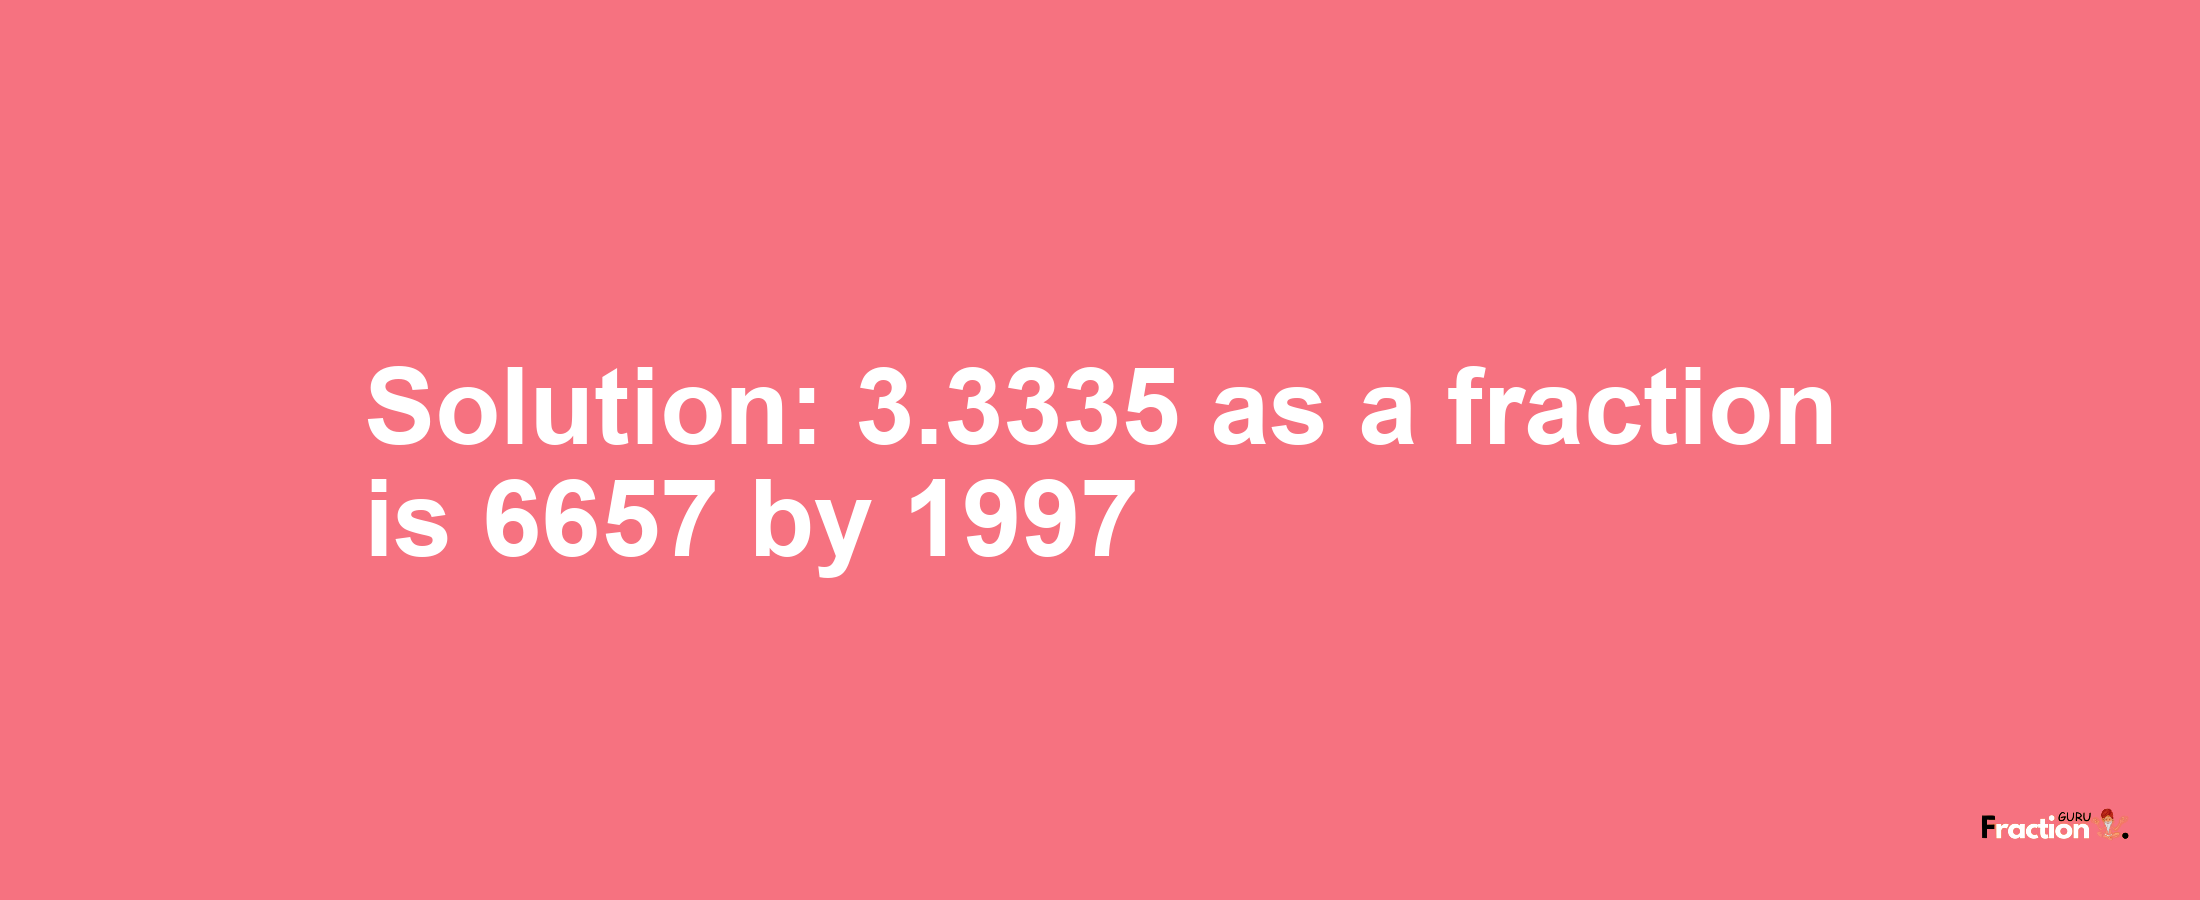 Solution:3.3335 as a fraction is 6657/1997